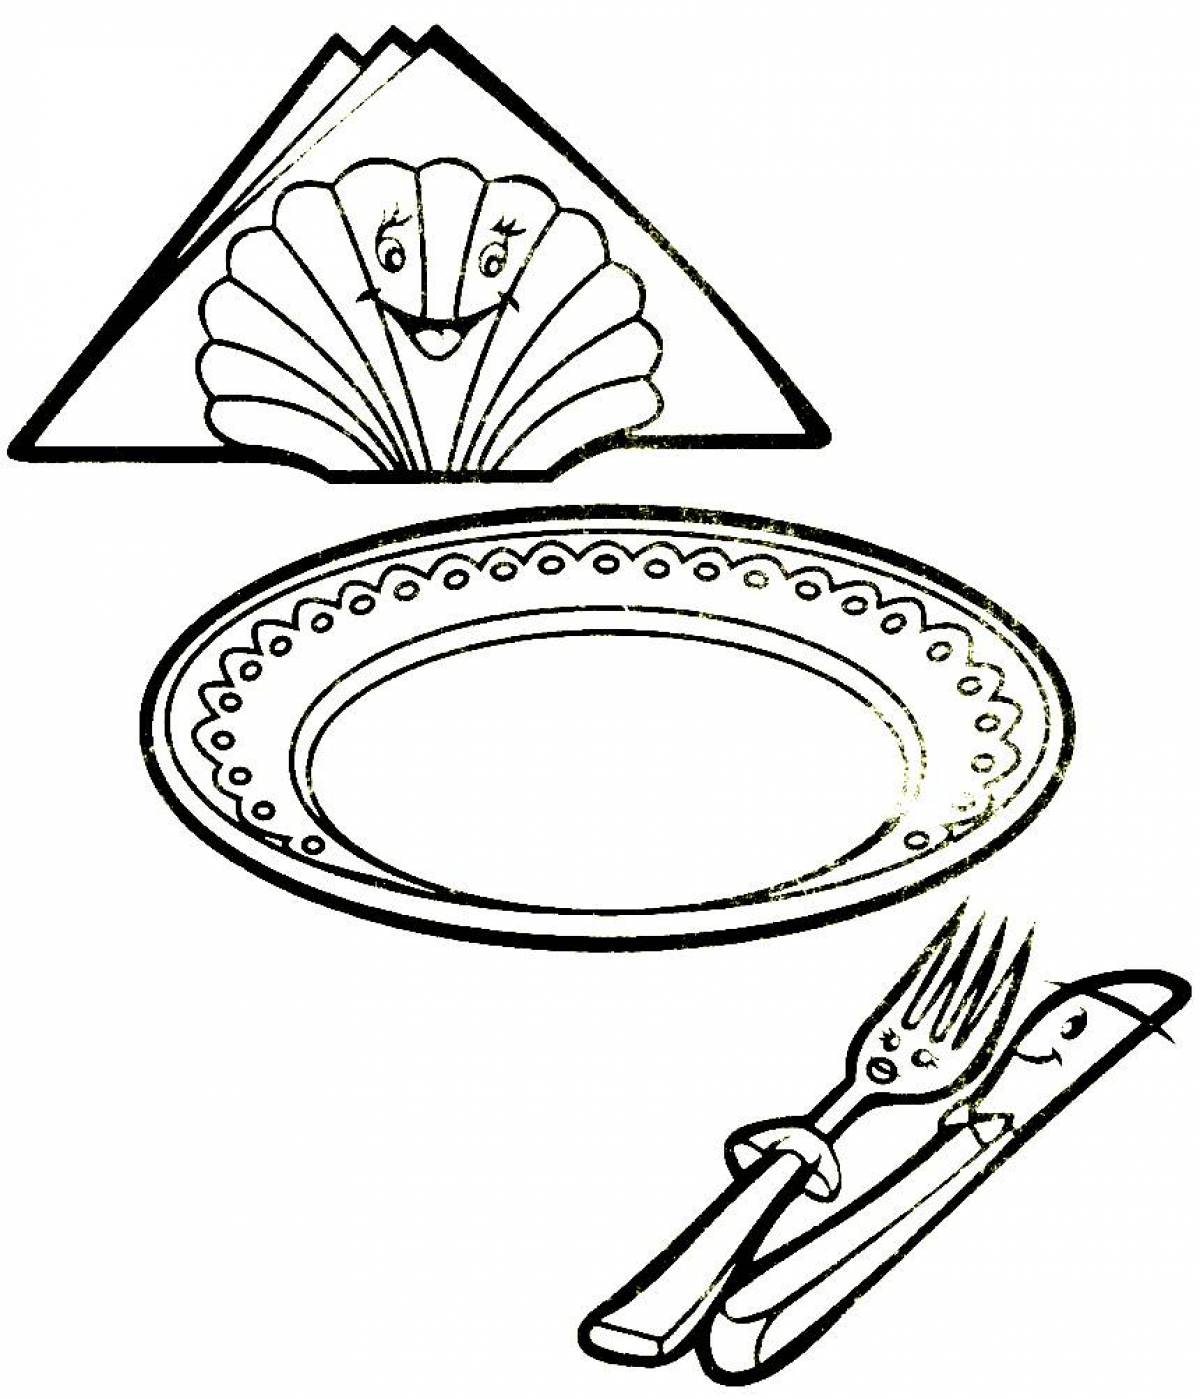 Plate coloring page